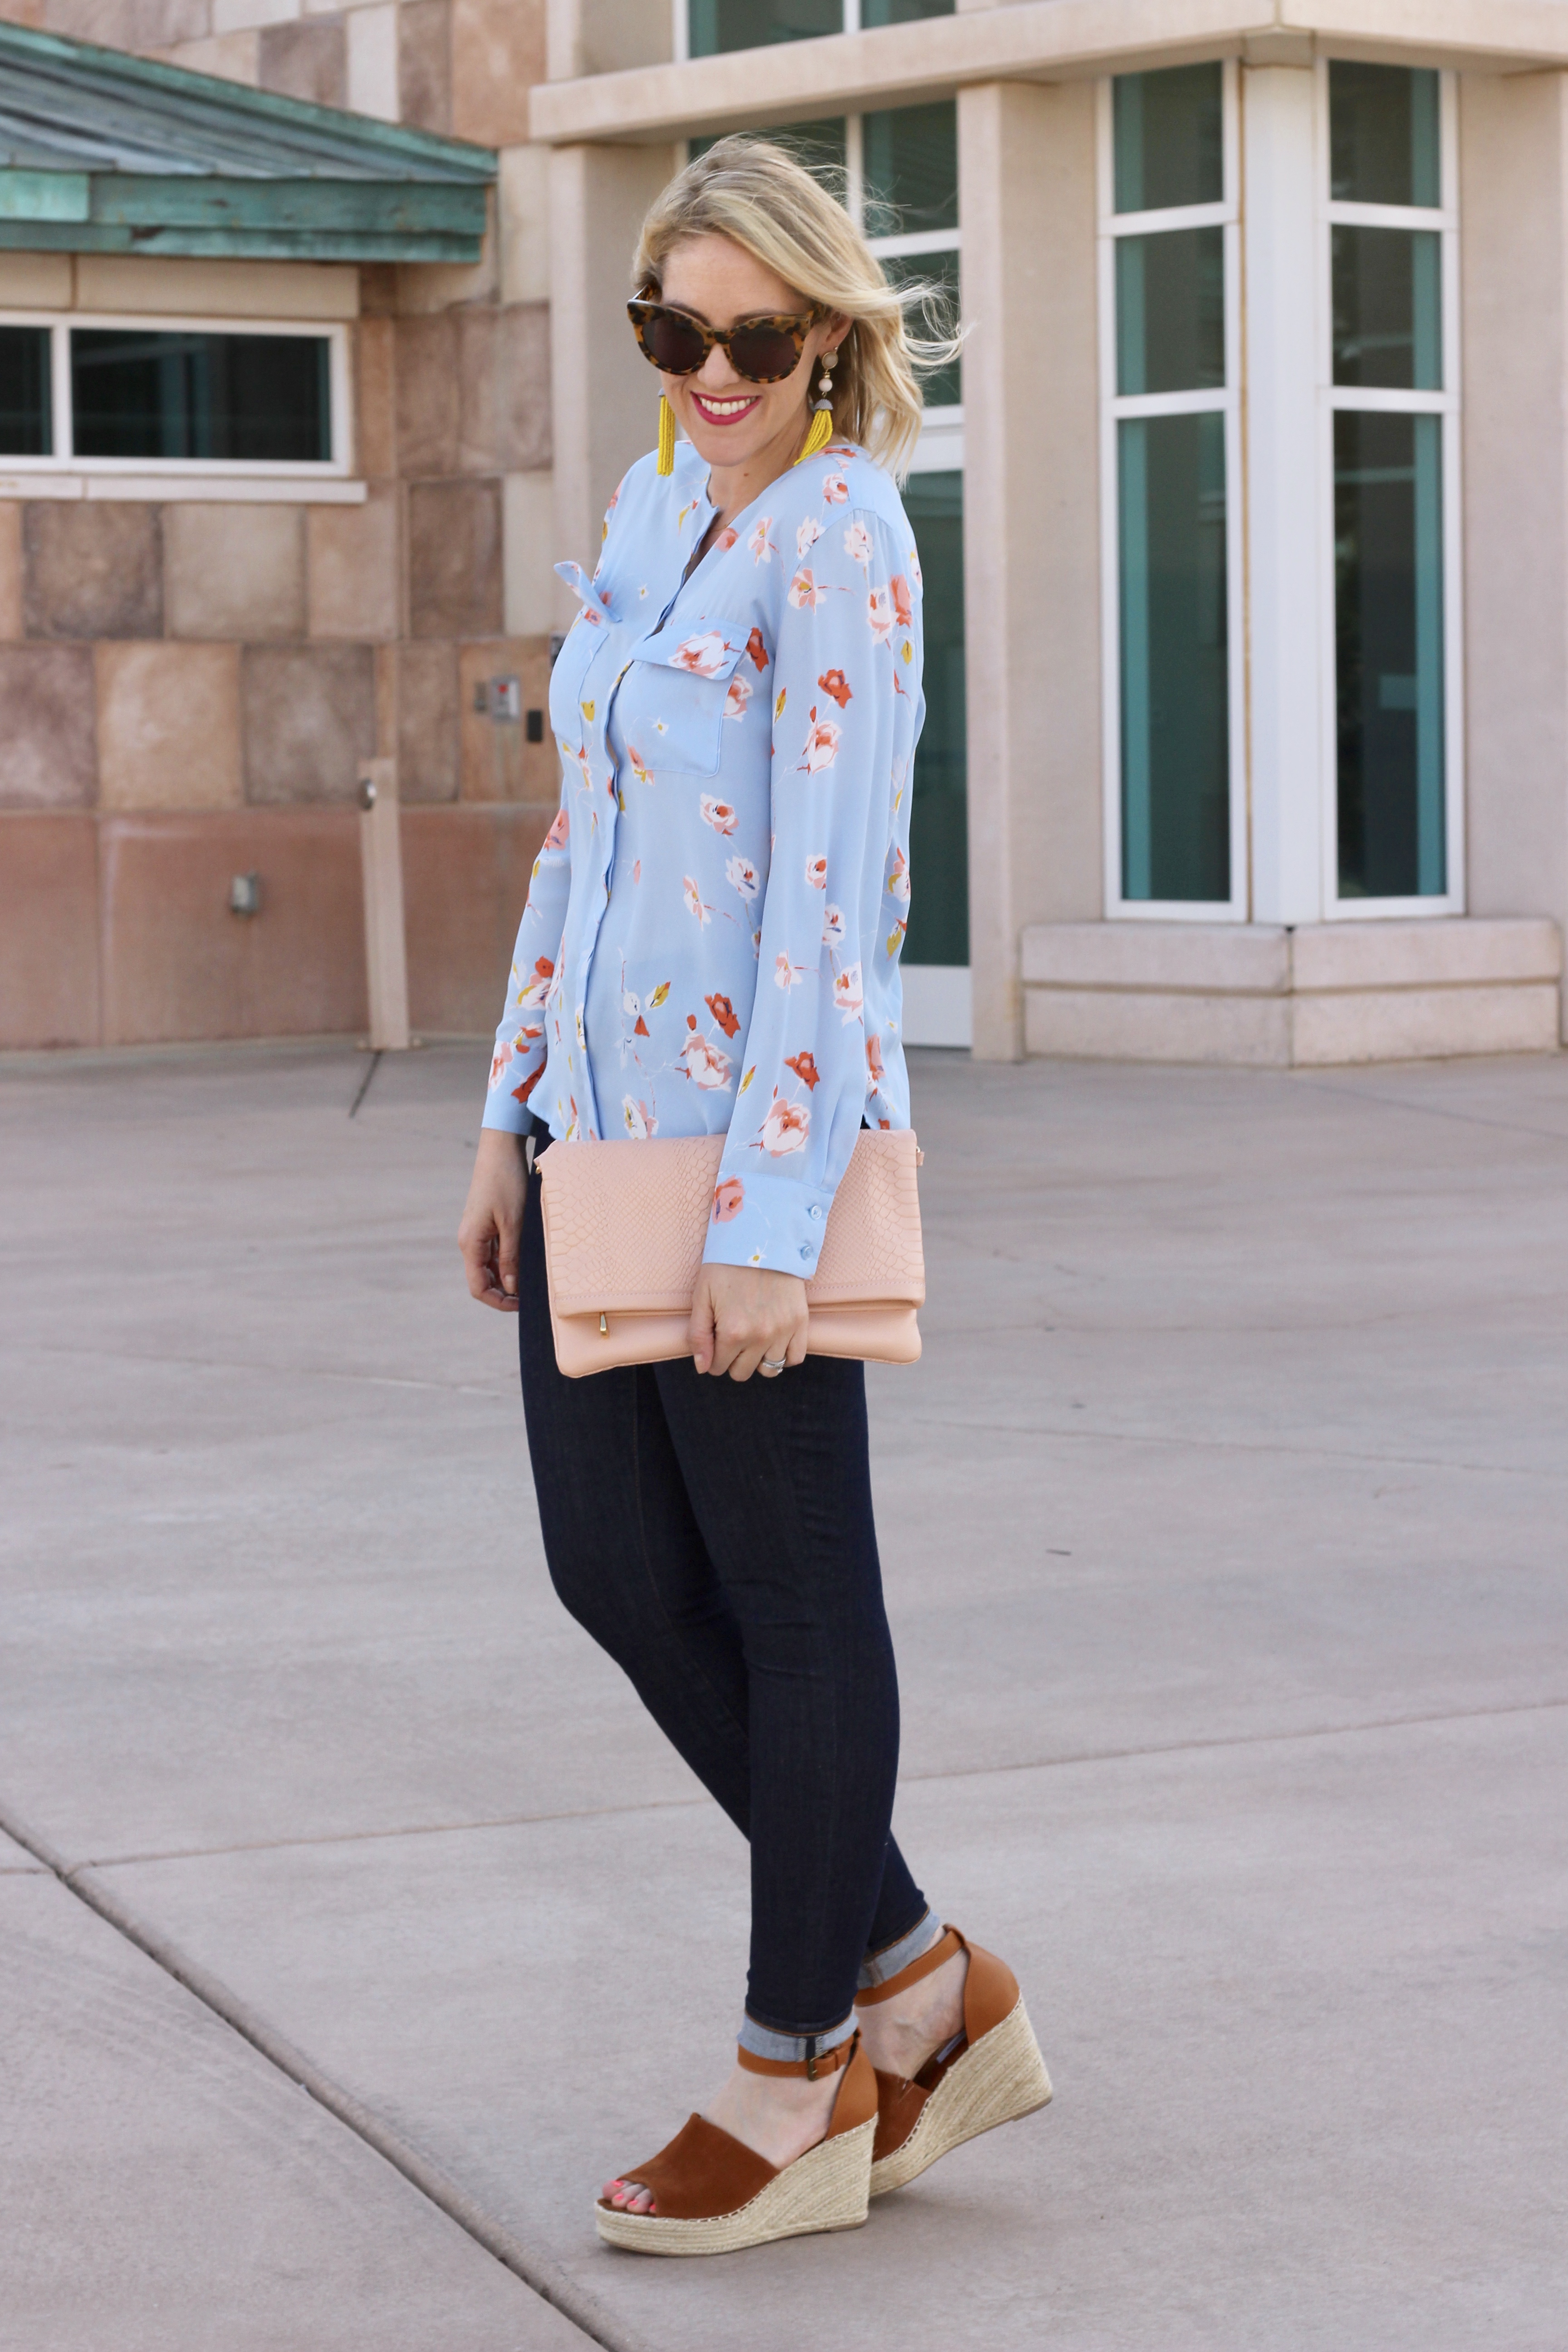 Who What Wear floral top and Steve Madden Jaylen Wedges